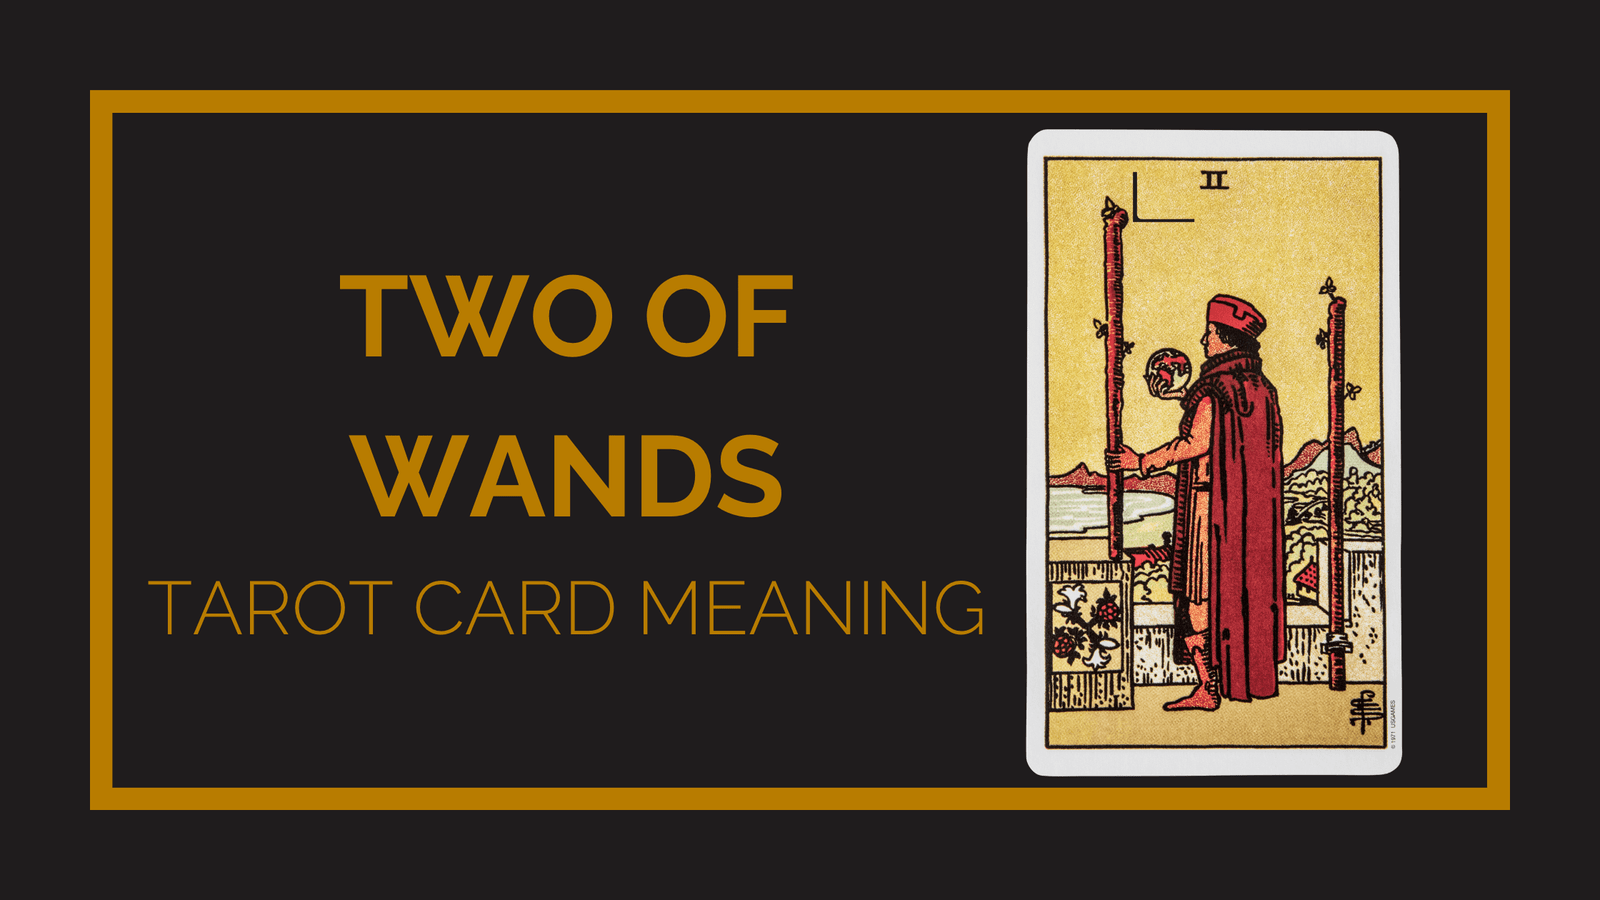 Two of wands tarot card meaning | tarot with gord